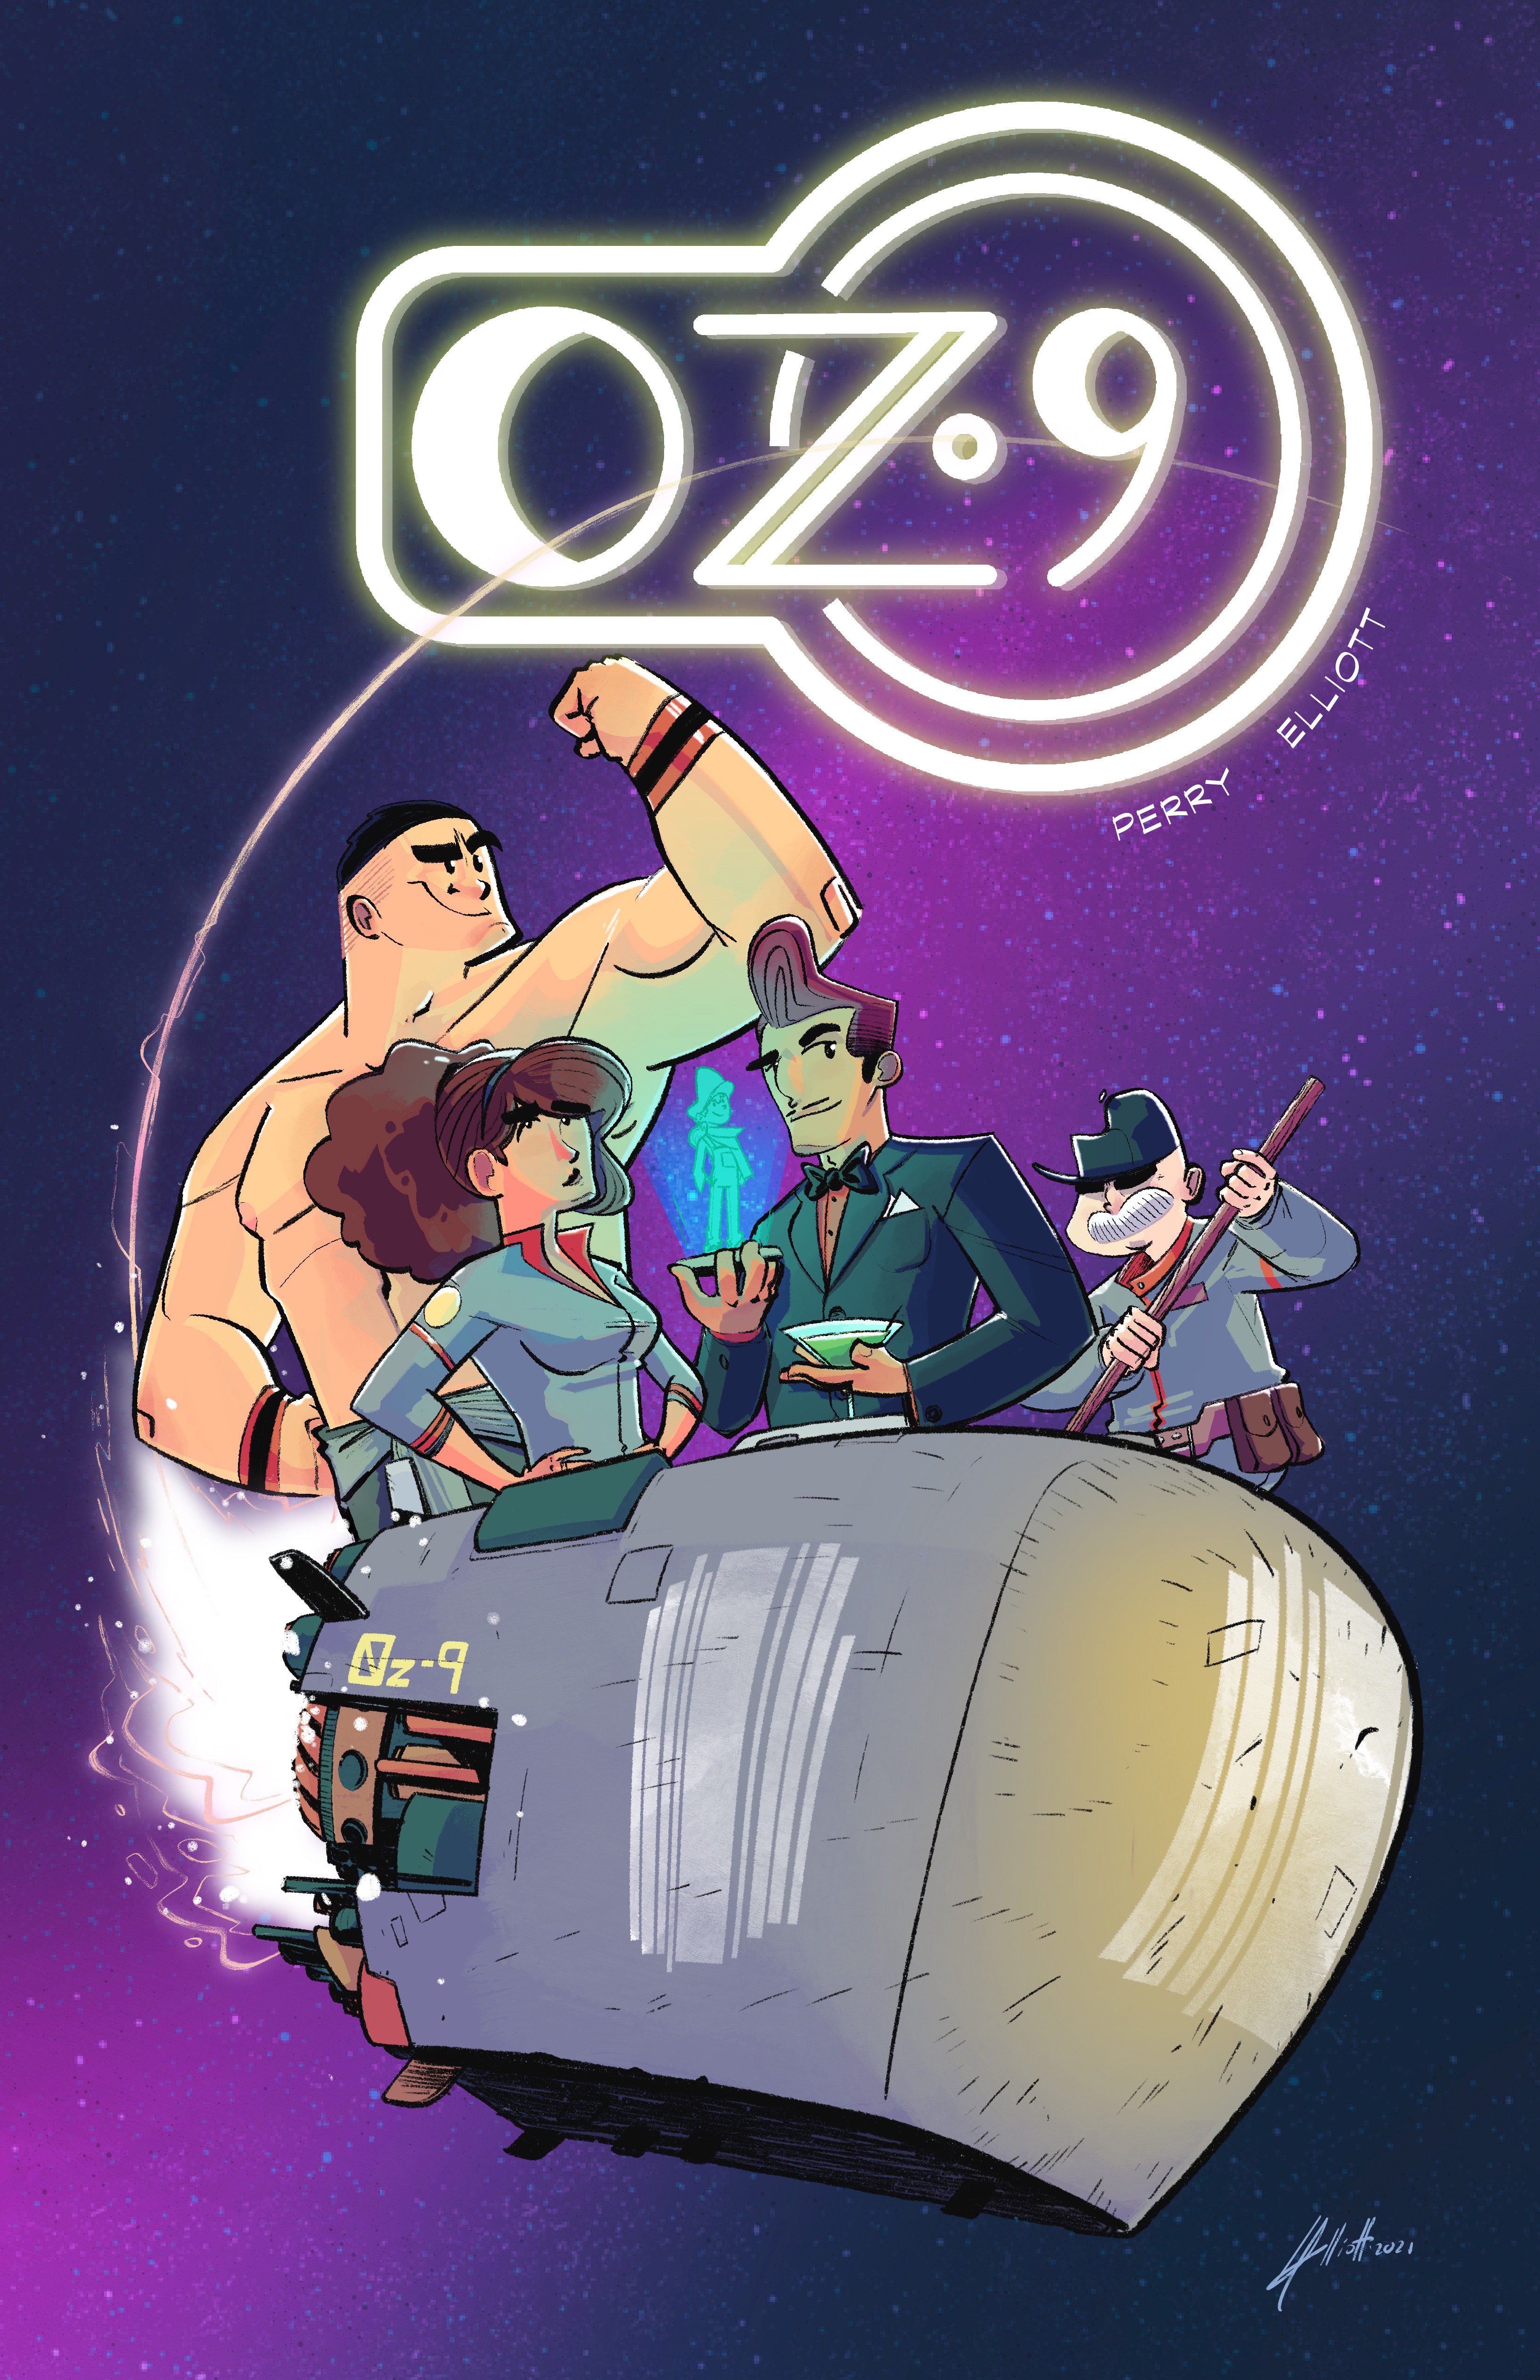 Cover of the Oz 9 comic book